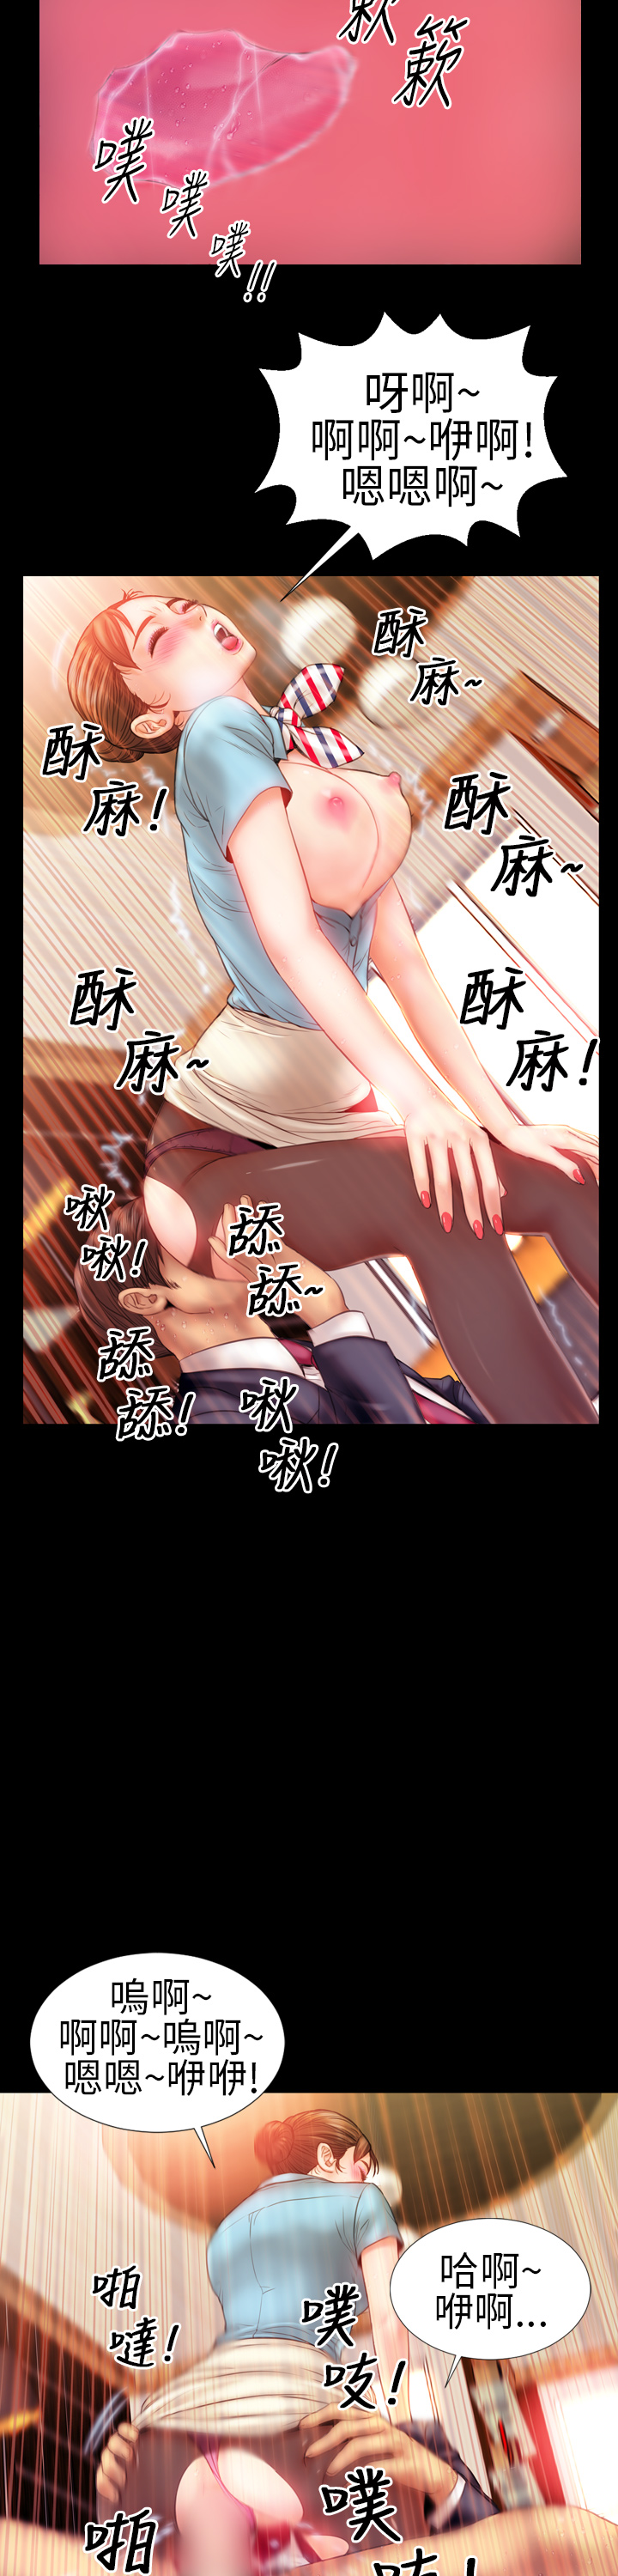 MY WIVES (淫蕩的妻子們) Ch.1 (Chinese) page 11 full